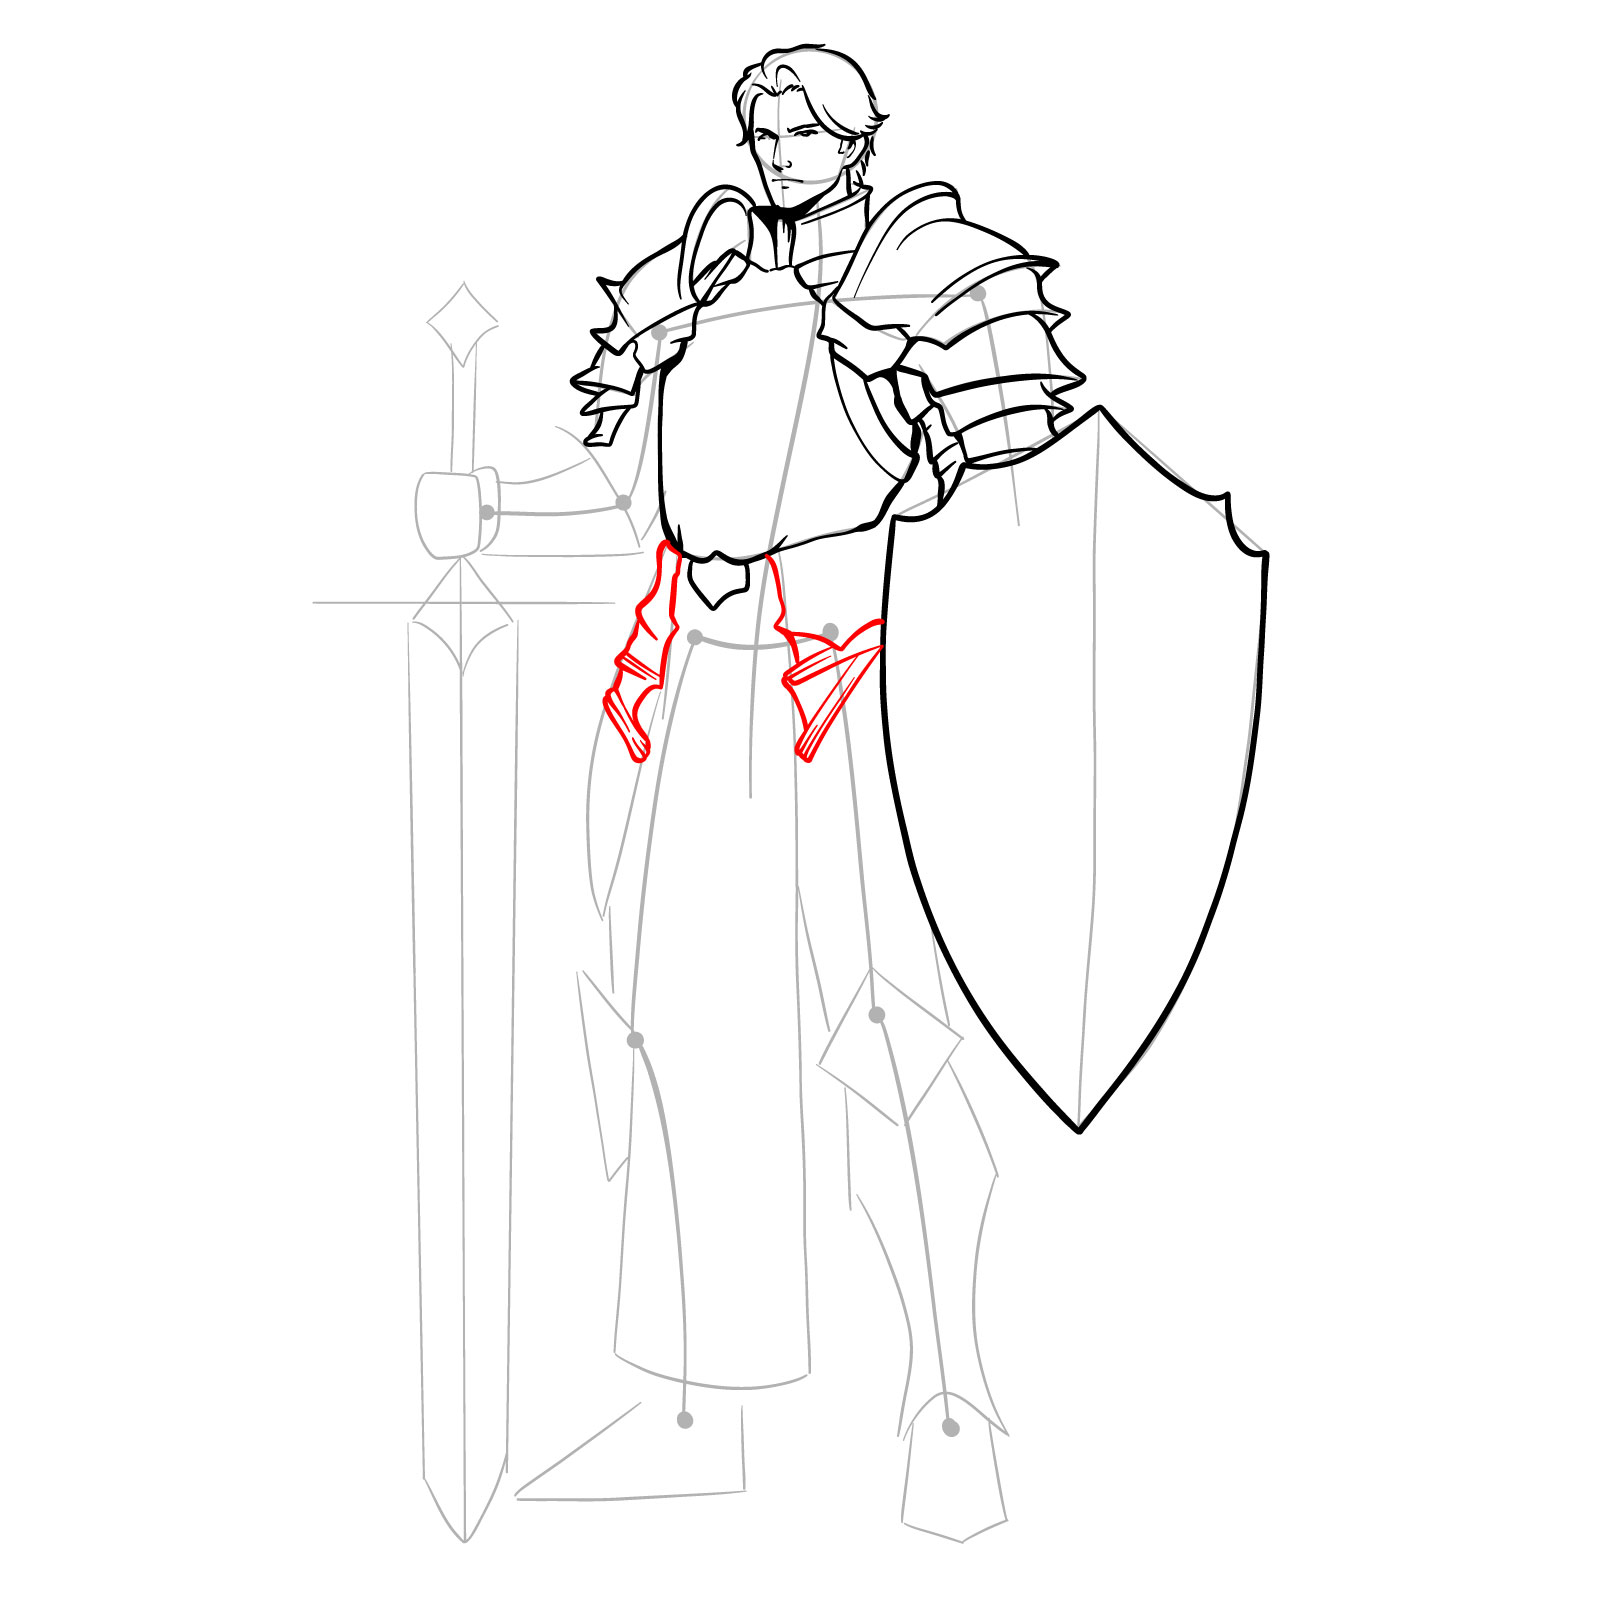 Beginning waist armor detailing on the paladin drawing - step 13